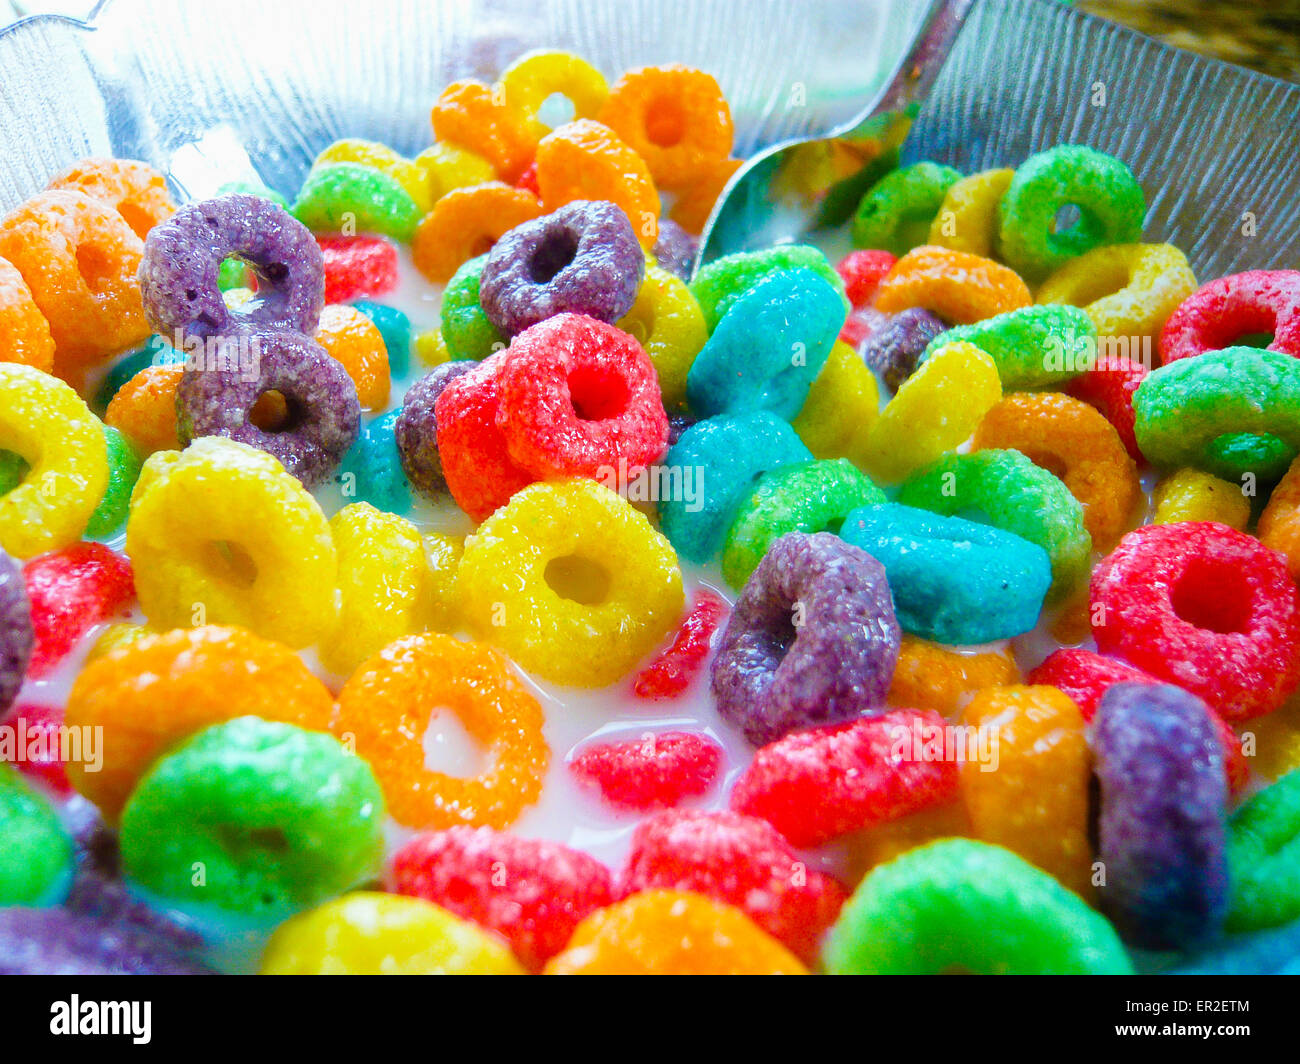 Bowl of brightly coloured Froot Loops breakfast cereal. Stock Photo